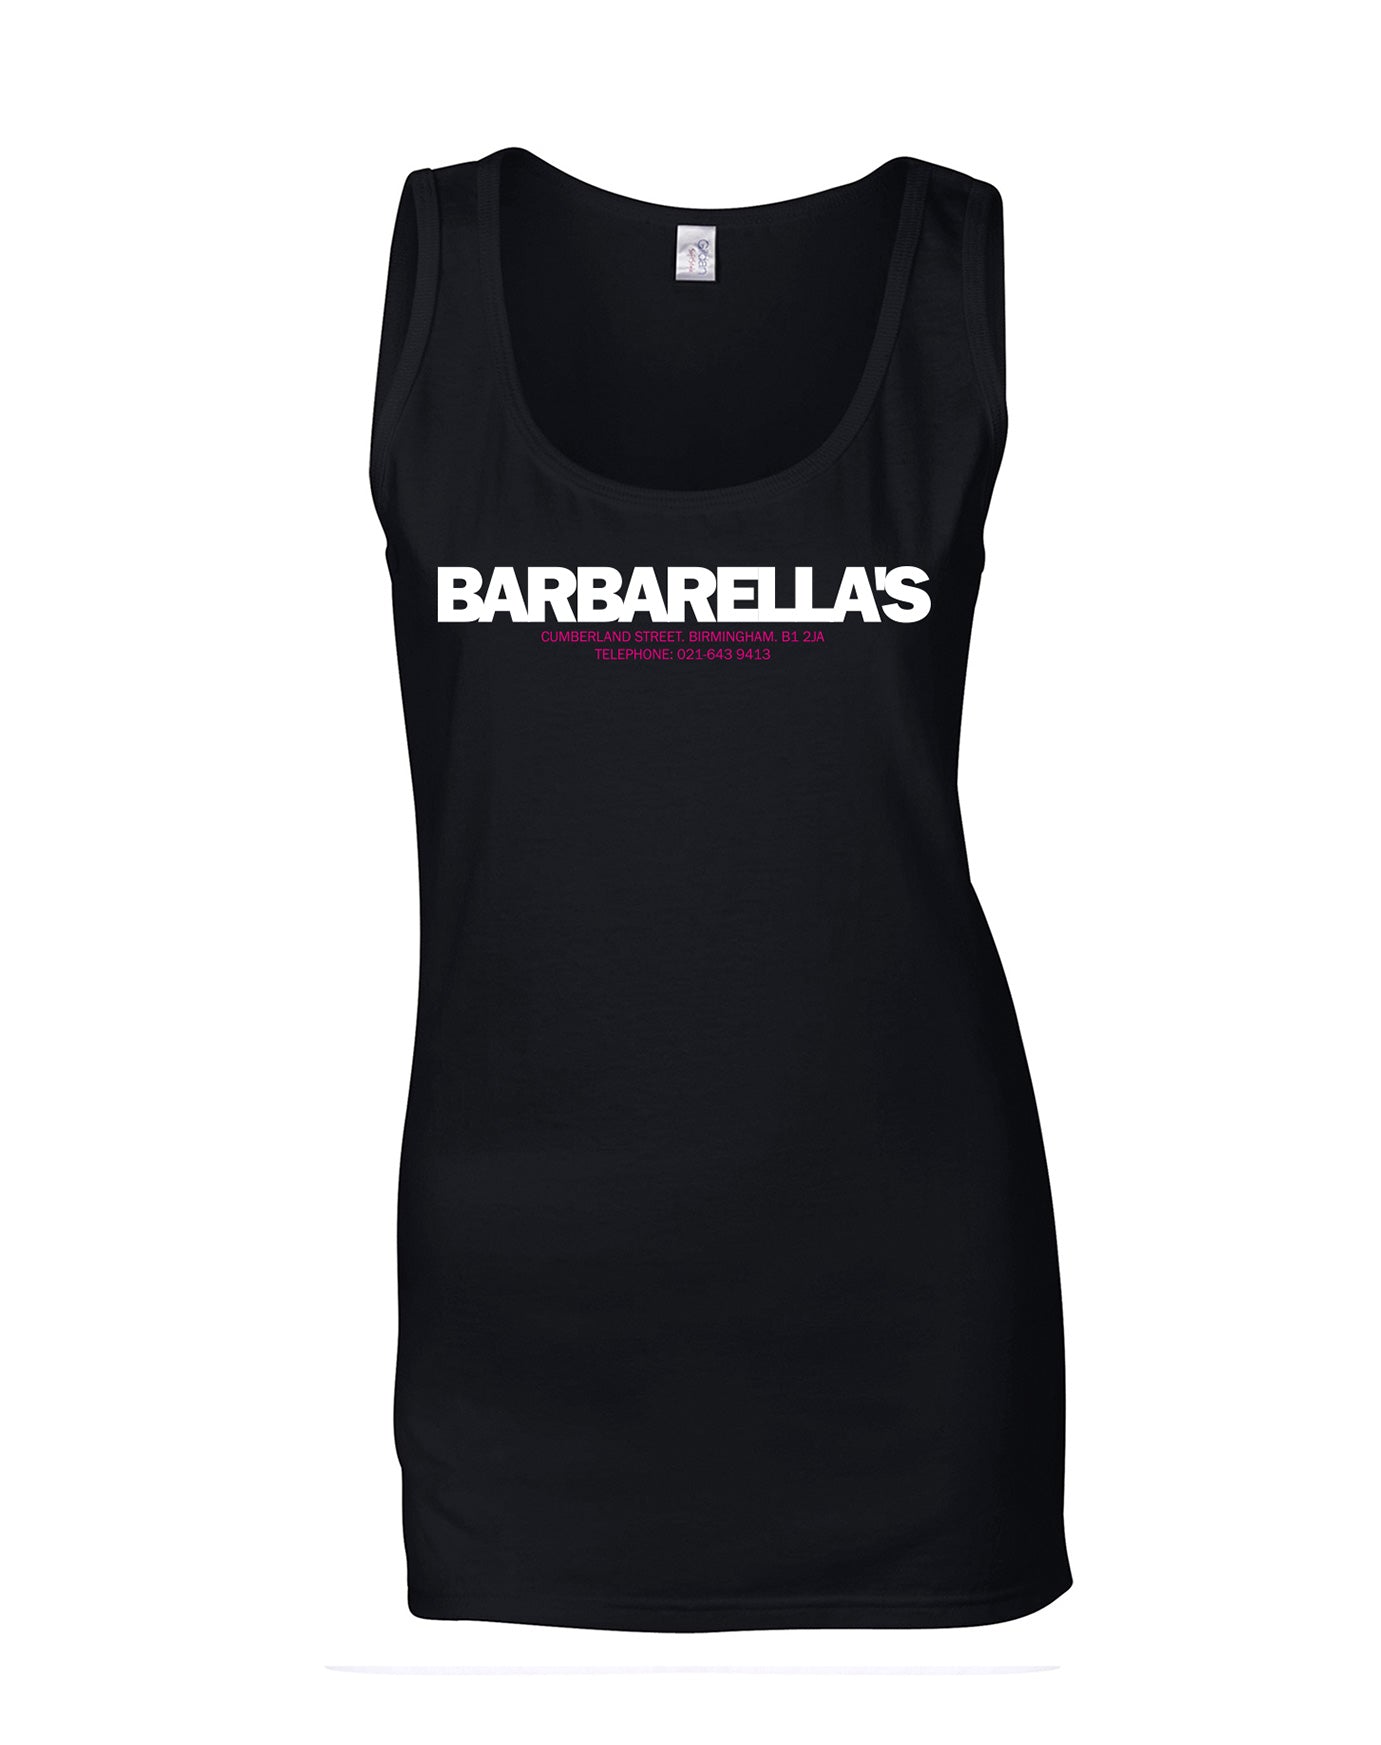 Barbarella's ladies fit vest - various colours - Dirty Stop Outs